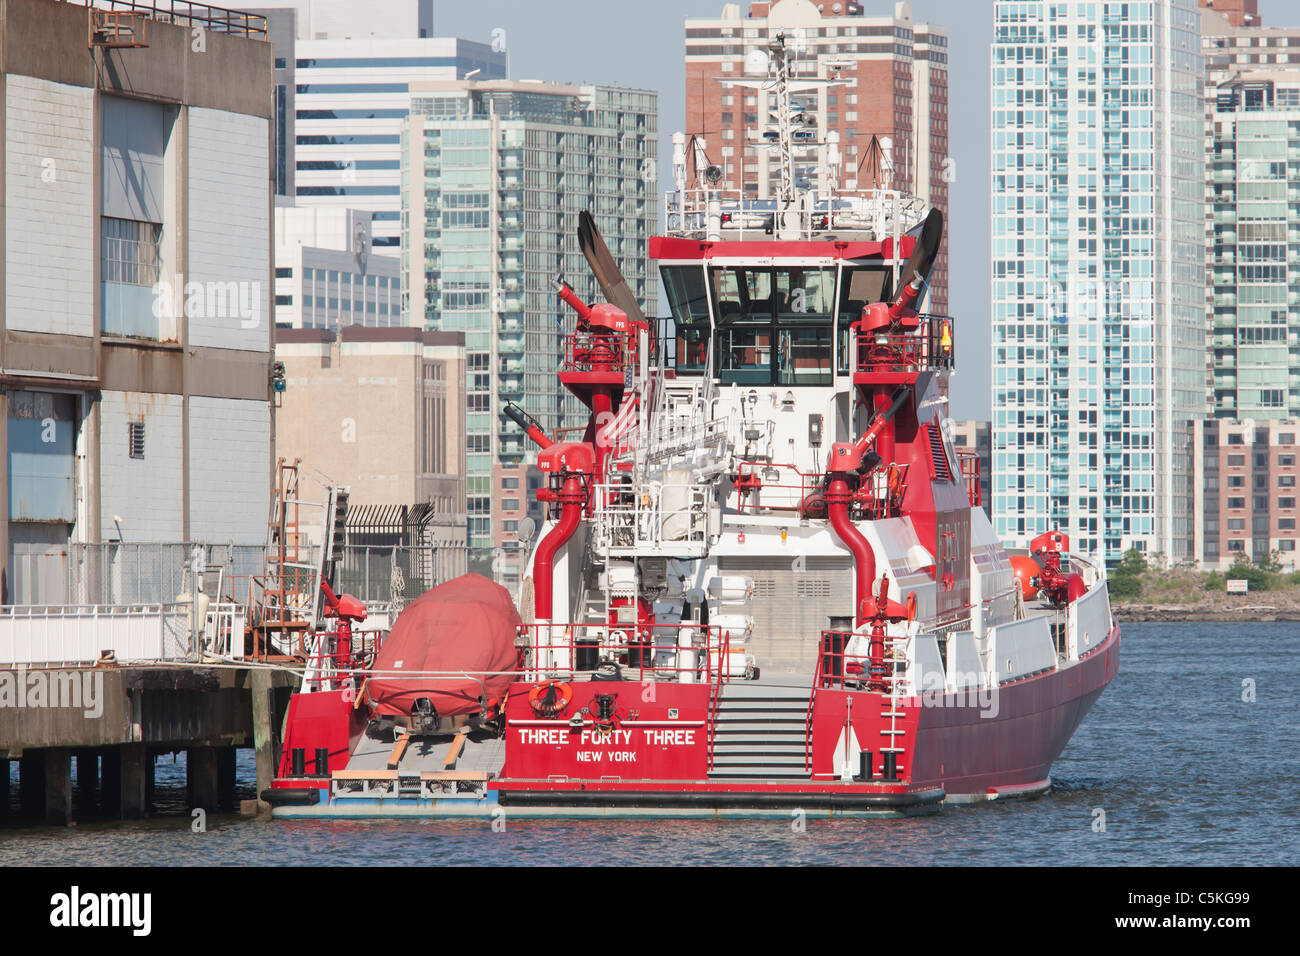 FDNY Marine 1 fire boat 'Three Forty Three' docked in its berth at Pier 40 on the Hudson River. Stock Photo